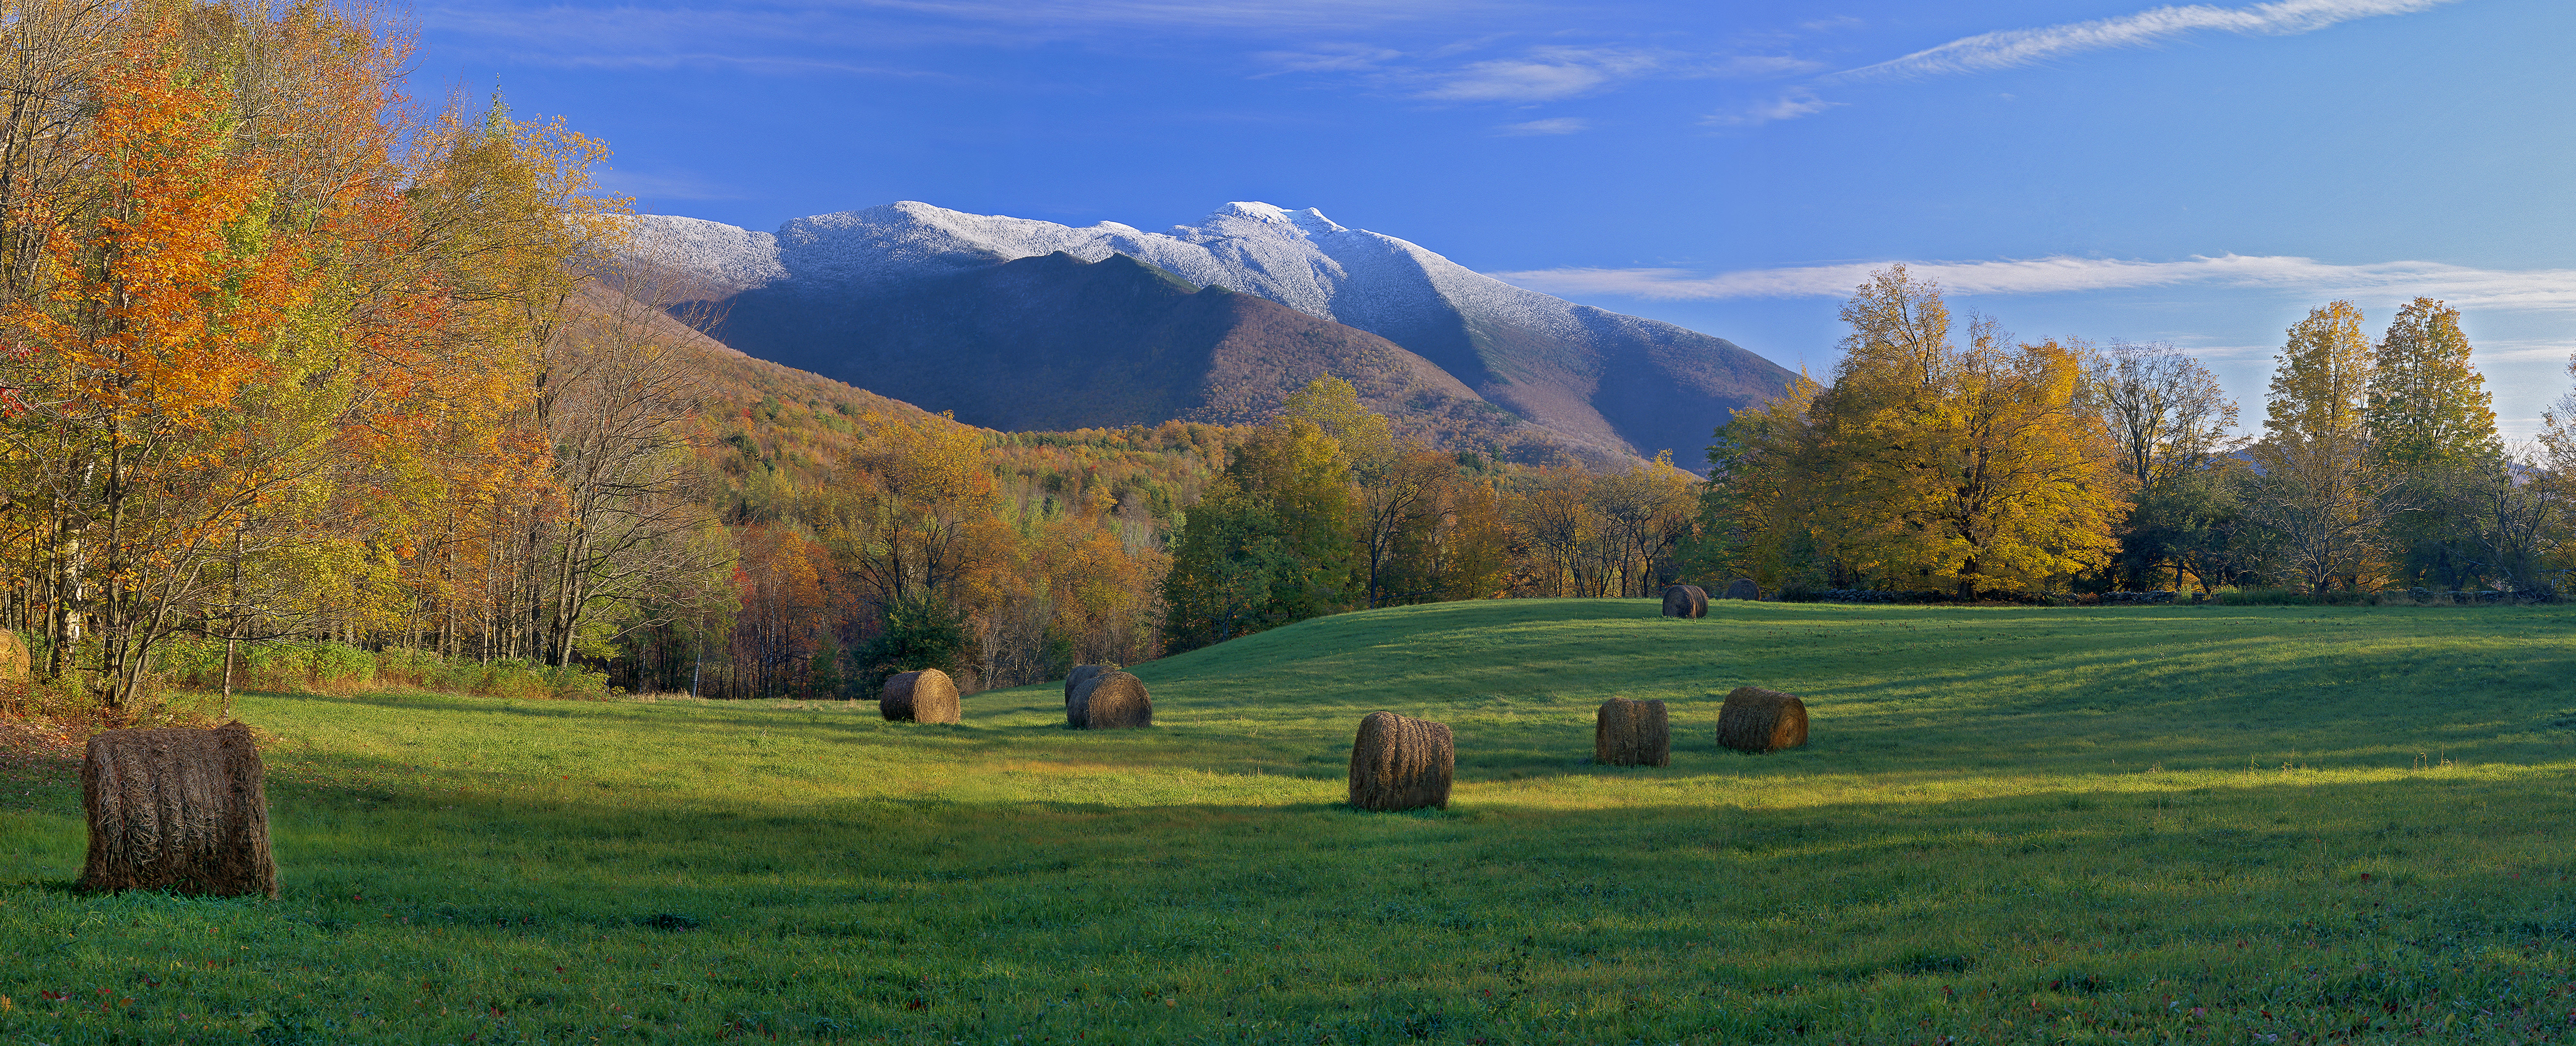 Wallpapers Vermont New England mountains on the desktop